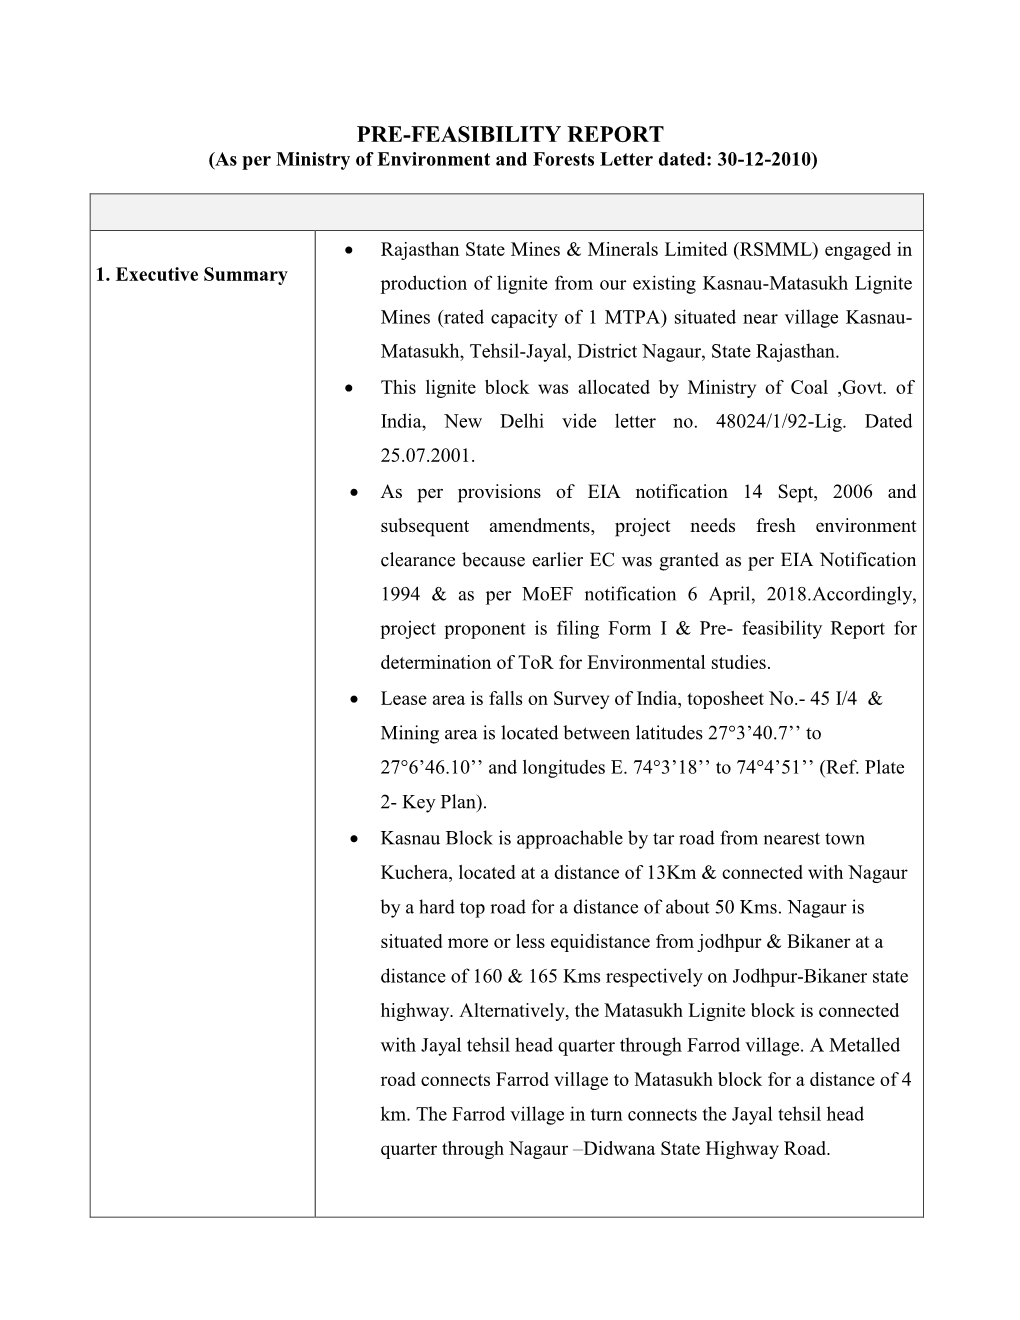 PRE-FEASIBILITY REPORT (As Per Ministry of Environment and Forests Letter Dated: 30-12-2010)